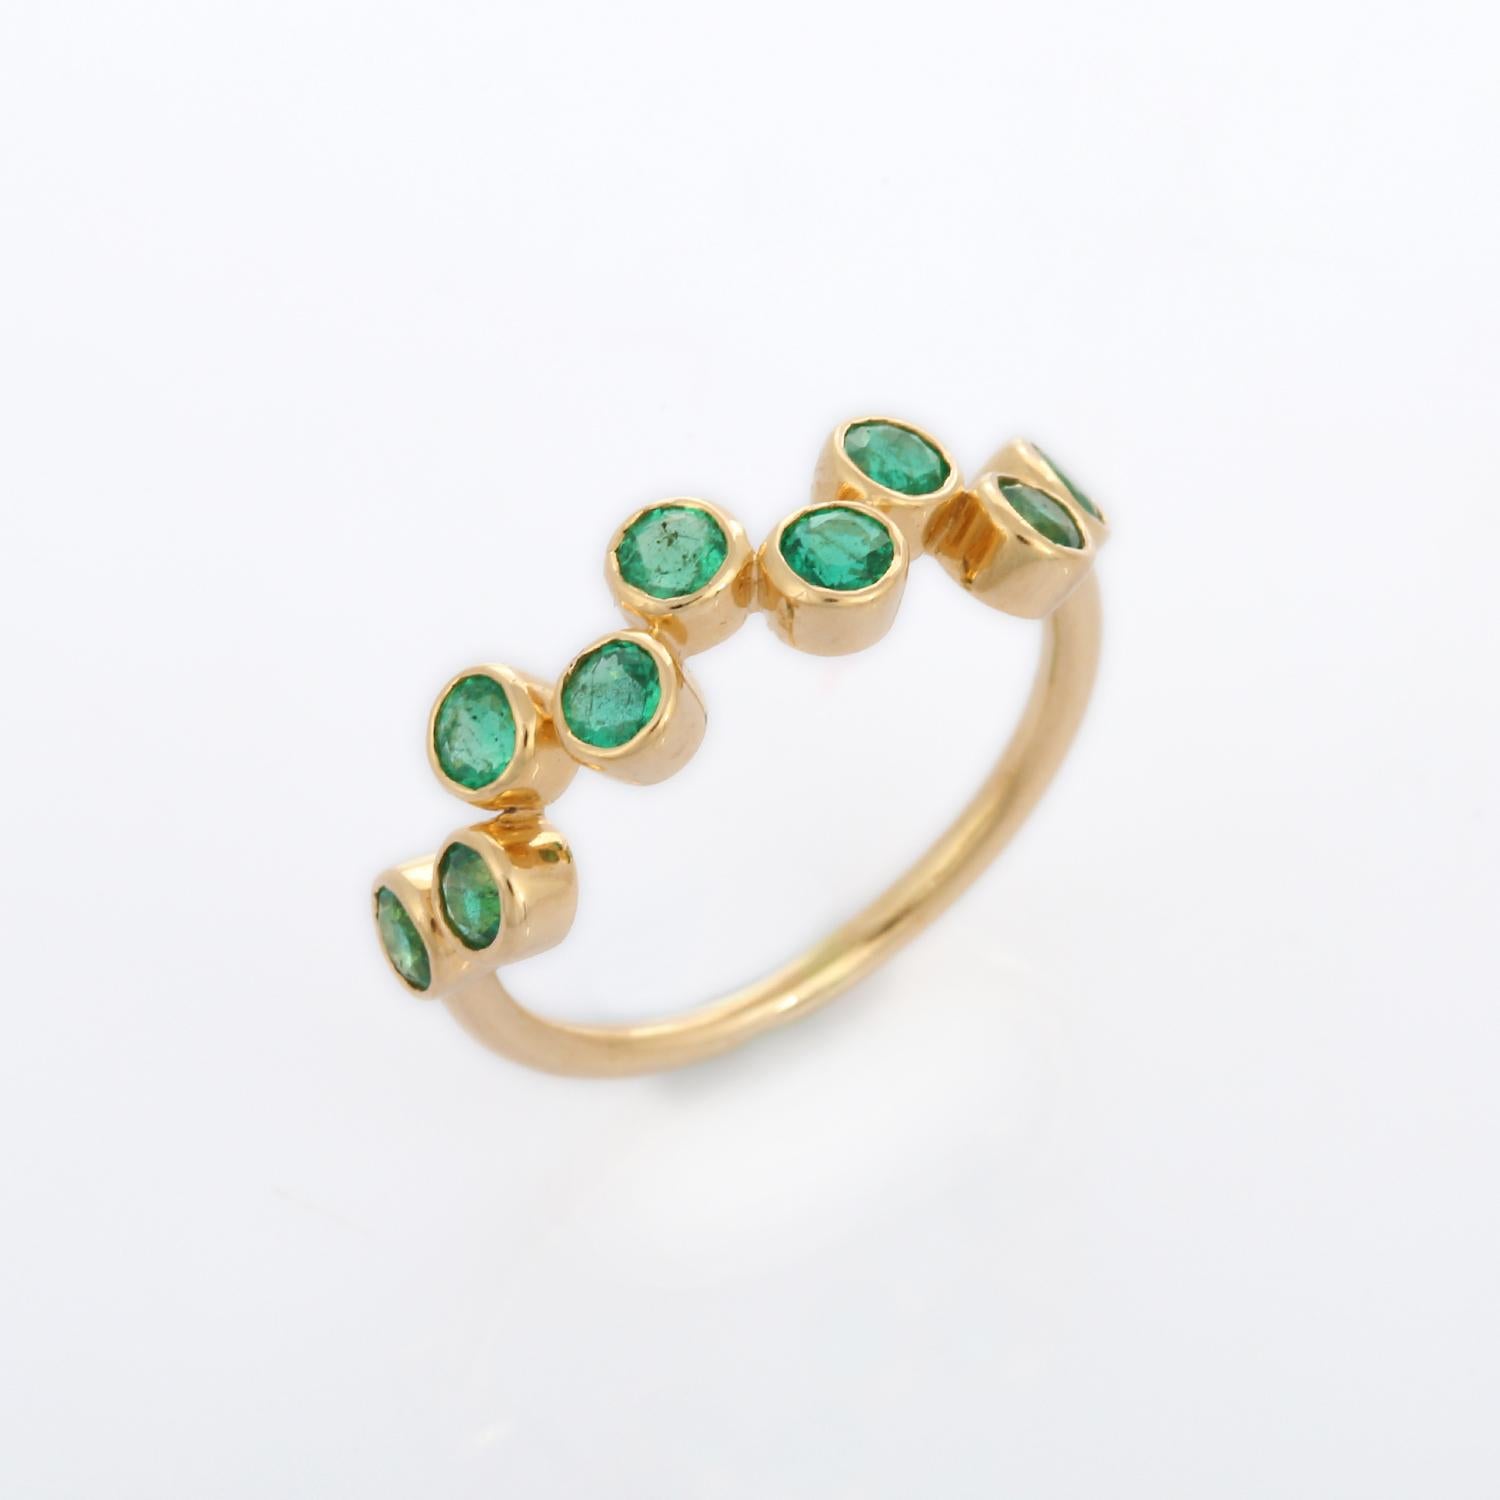 For Sale:  Emerald Gemstone Stacking Ring in 18K Yellow Gold 6